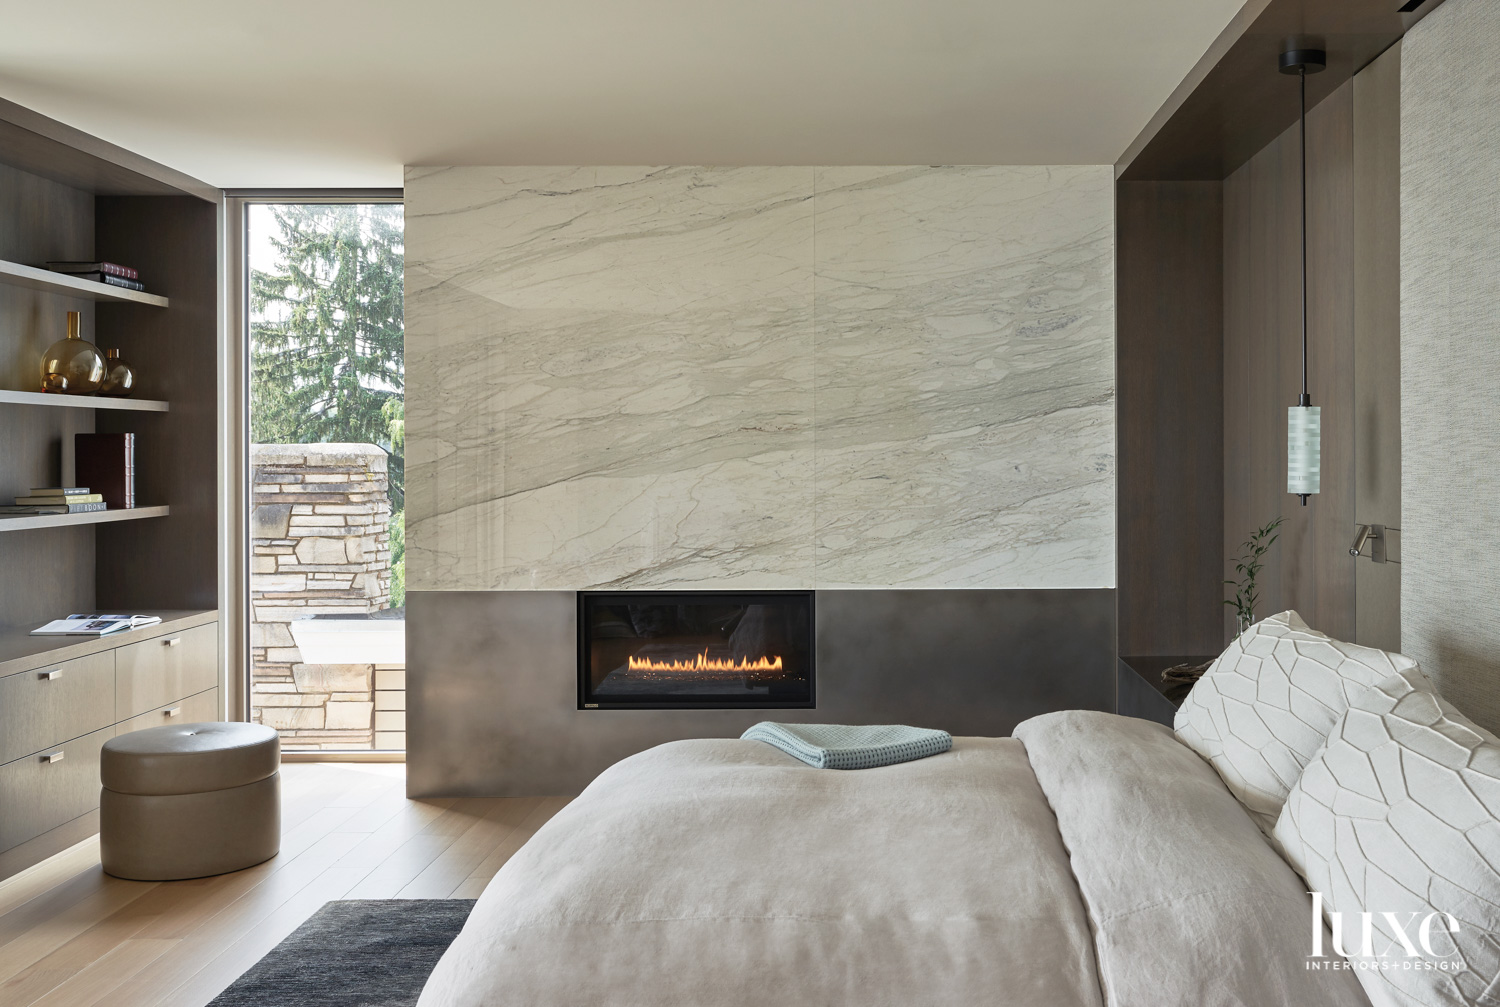 Peaceful zen bedroom design with bed and fireplace shown